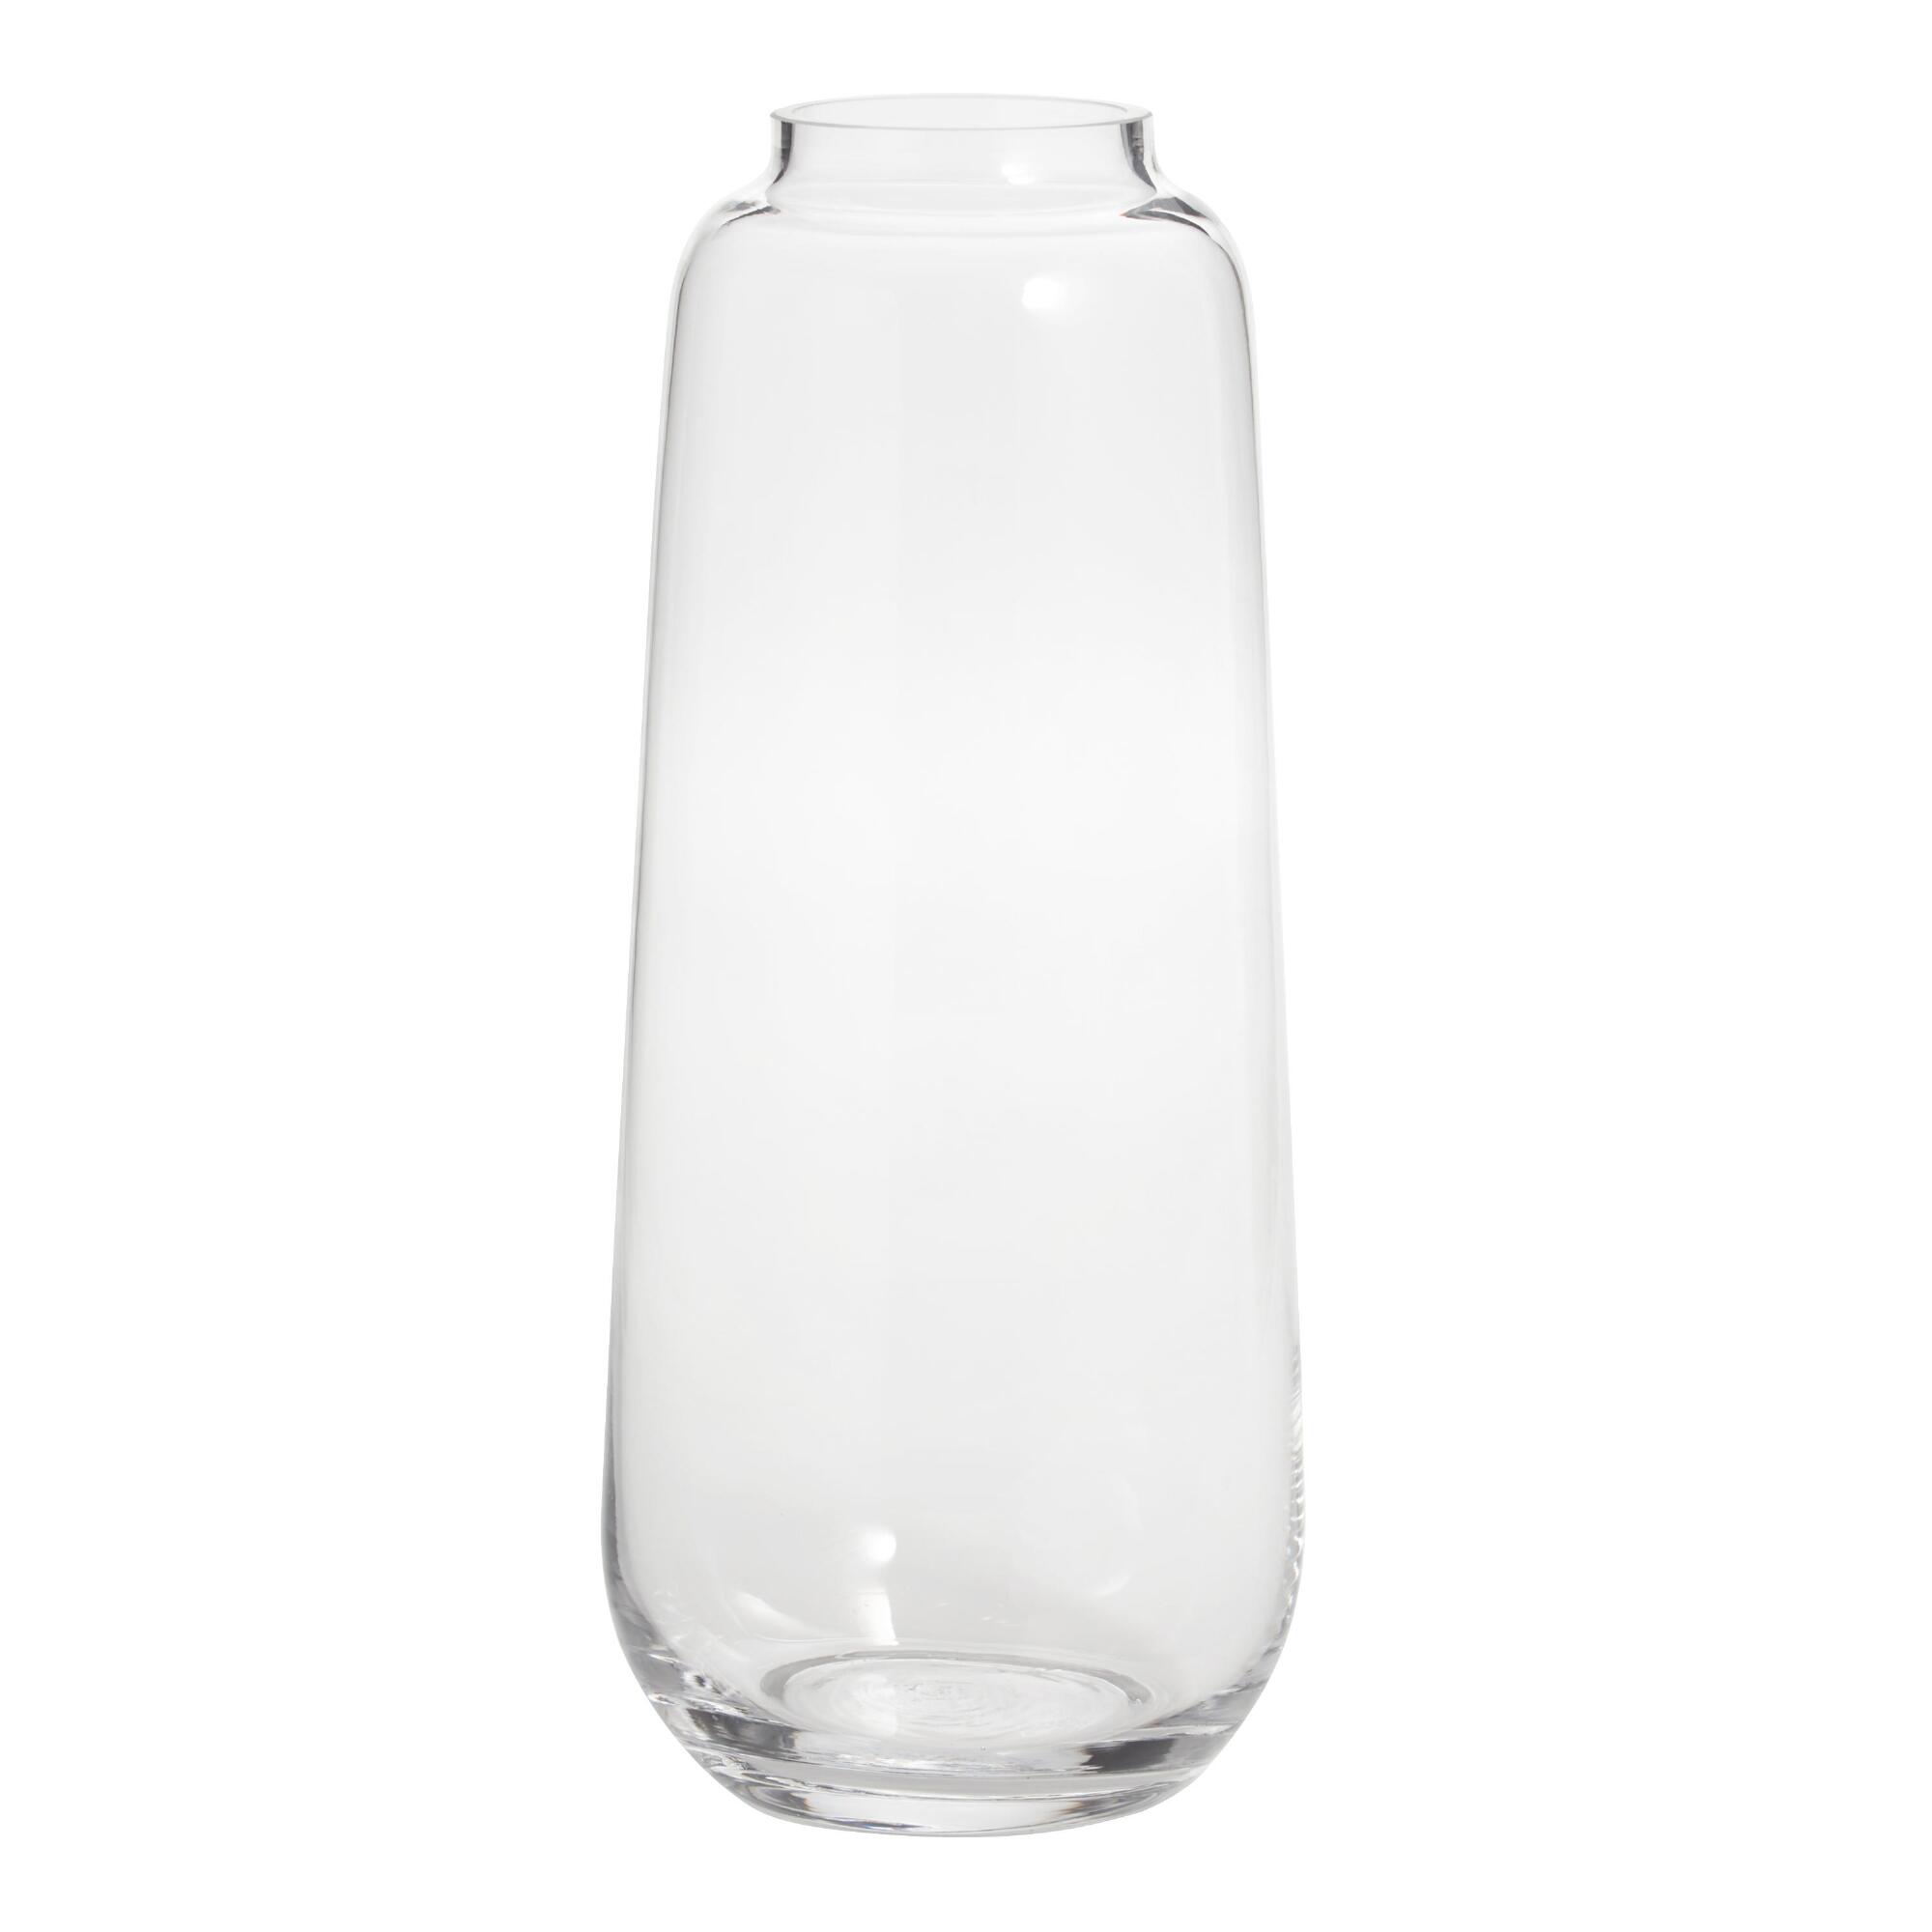 Tall Clear Glass Full Body Contemporary Vase by World Market